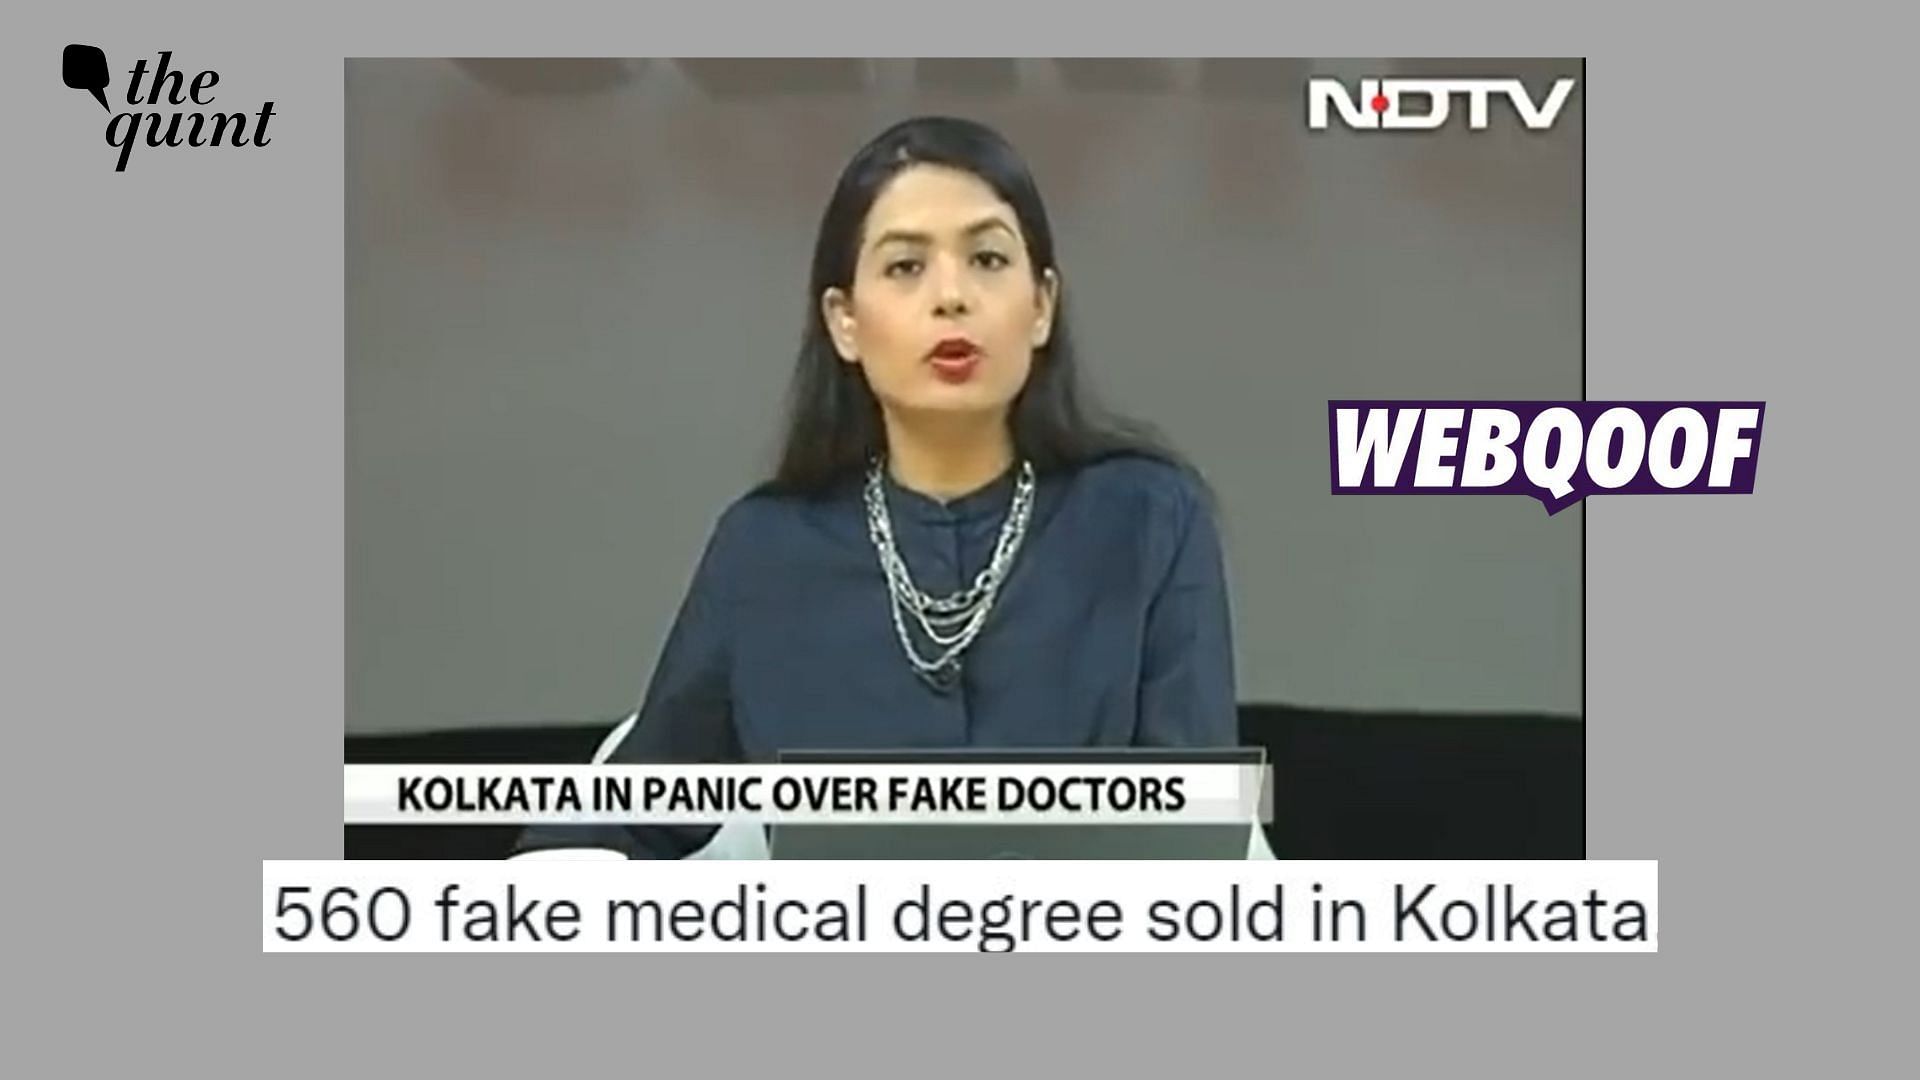 <div class="paragraphs"><p>The claim suggests that 560 fake medical degrees were sold in Kerala.&nbsp;</p></div>